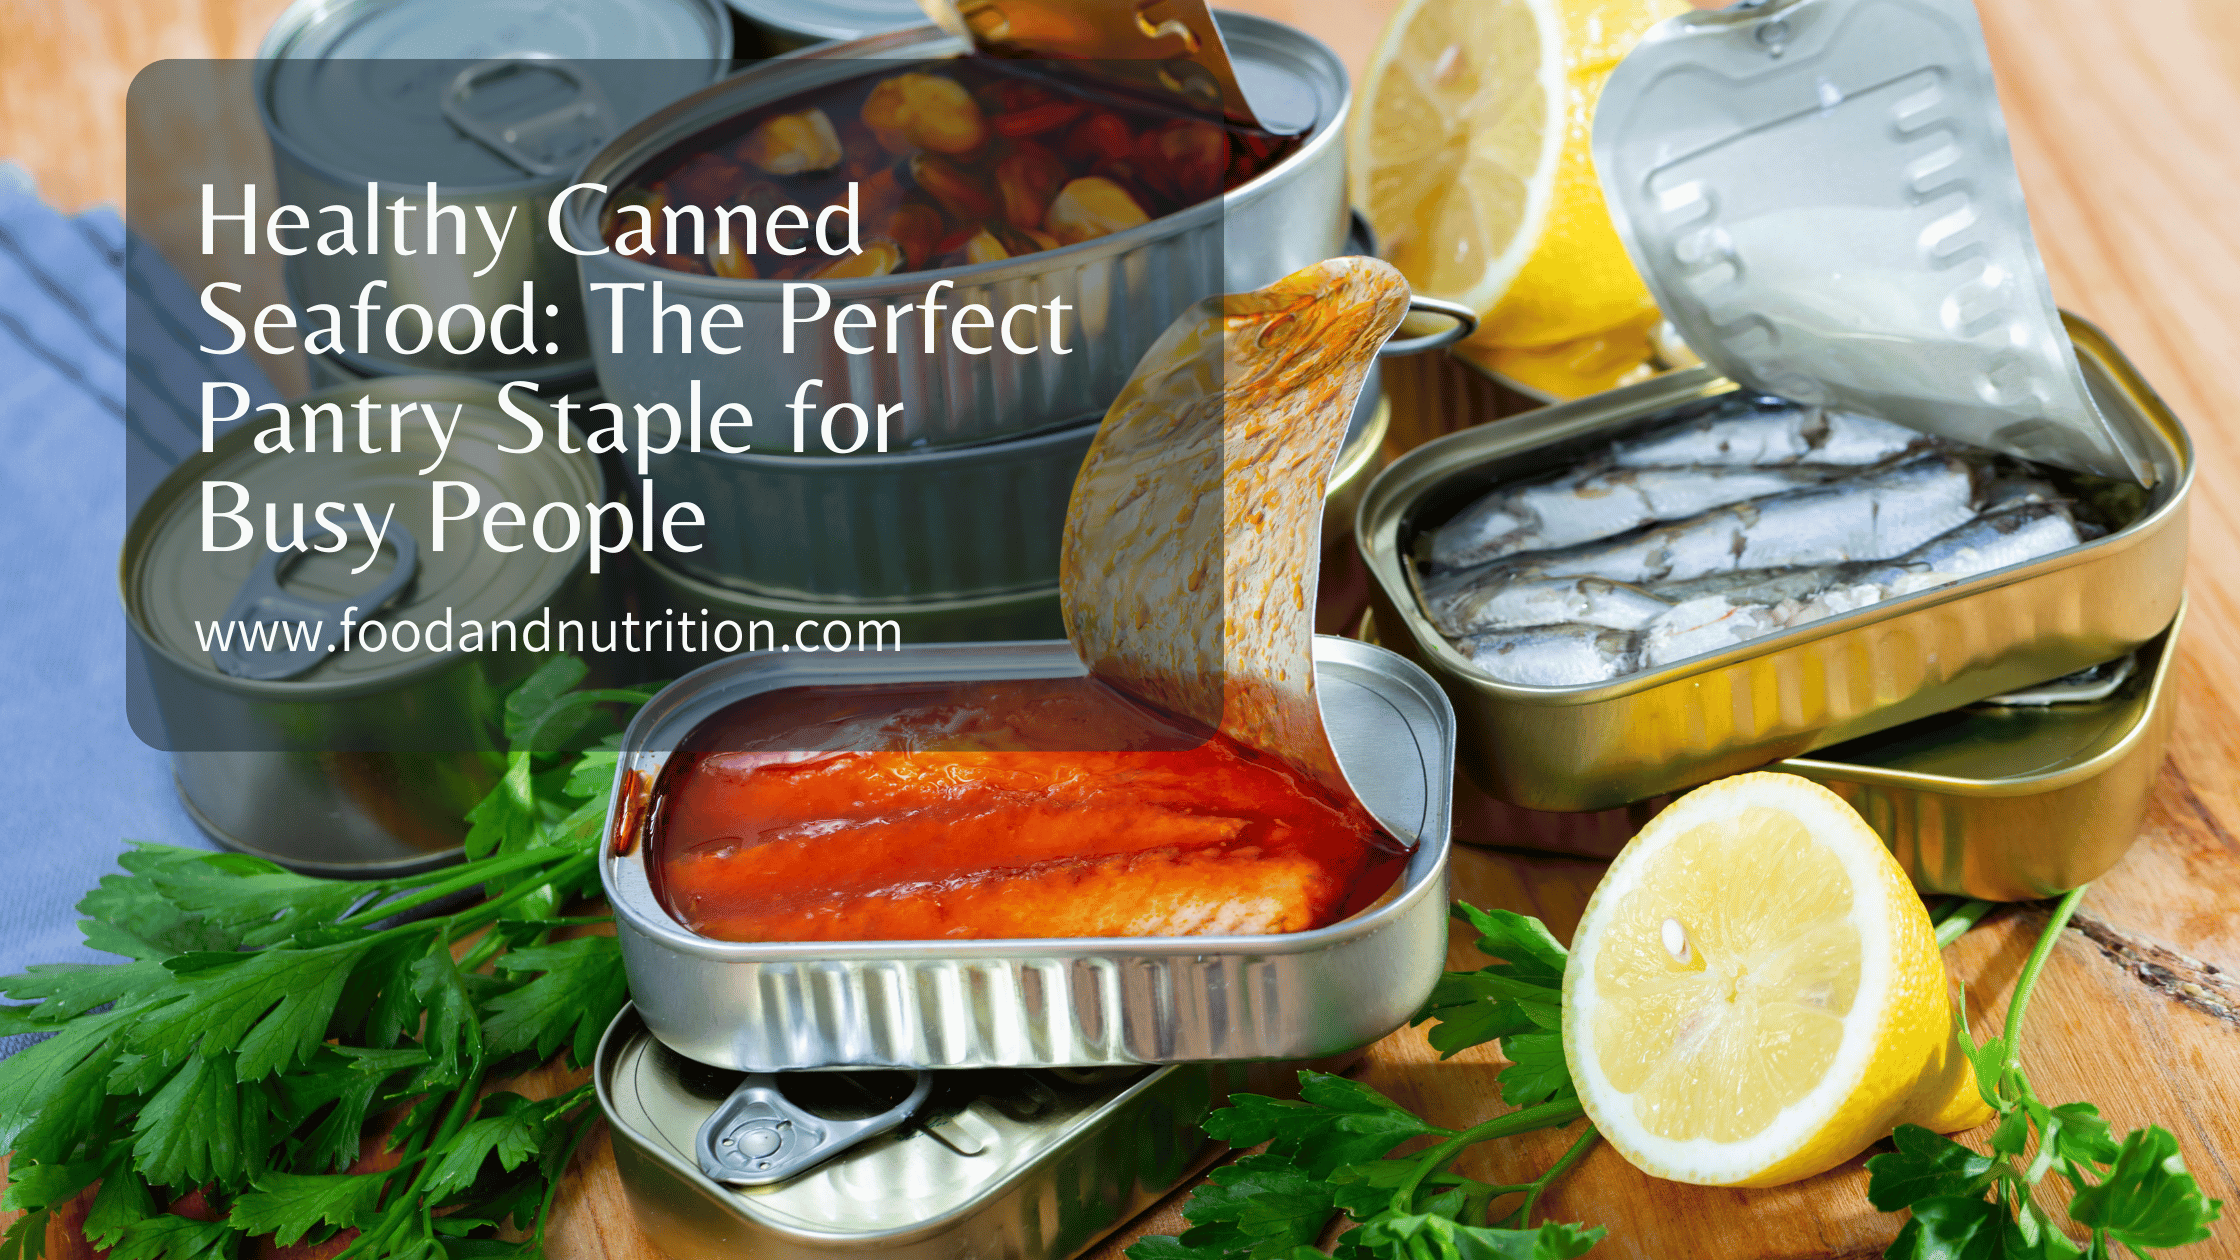 Healthy Canned Seafood: The Perfect Pantry Staple for Busy People